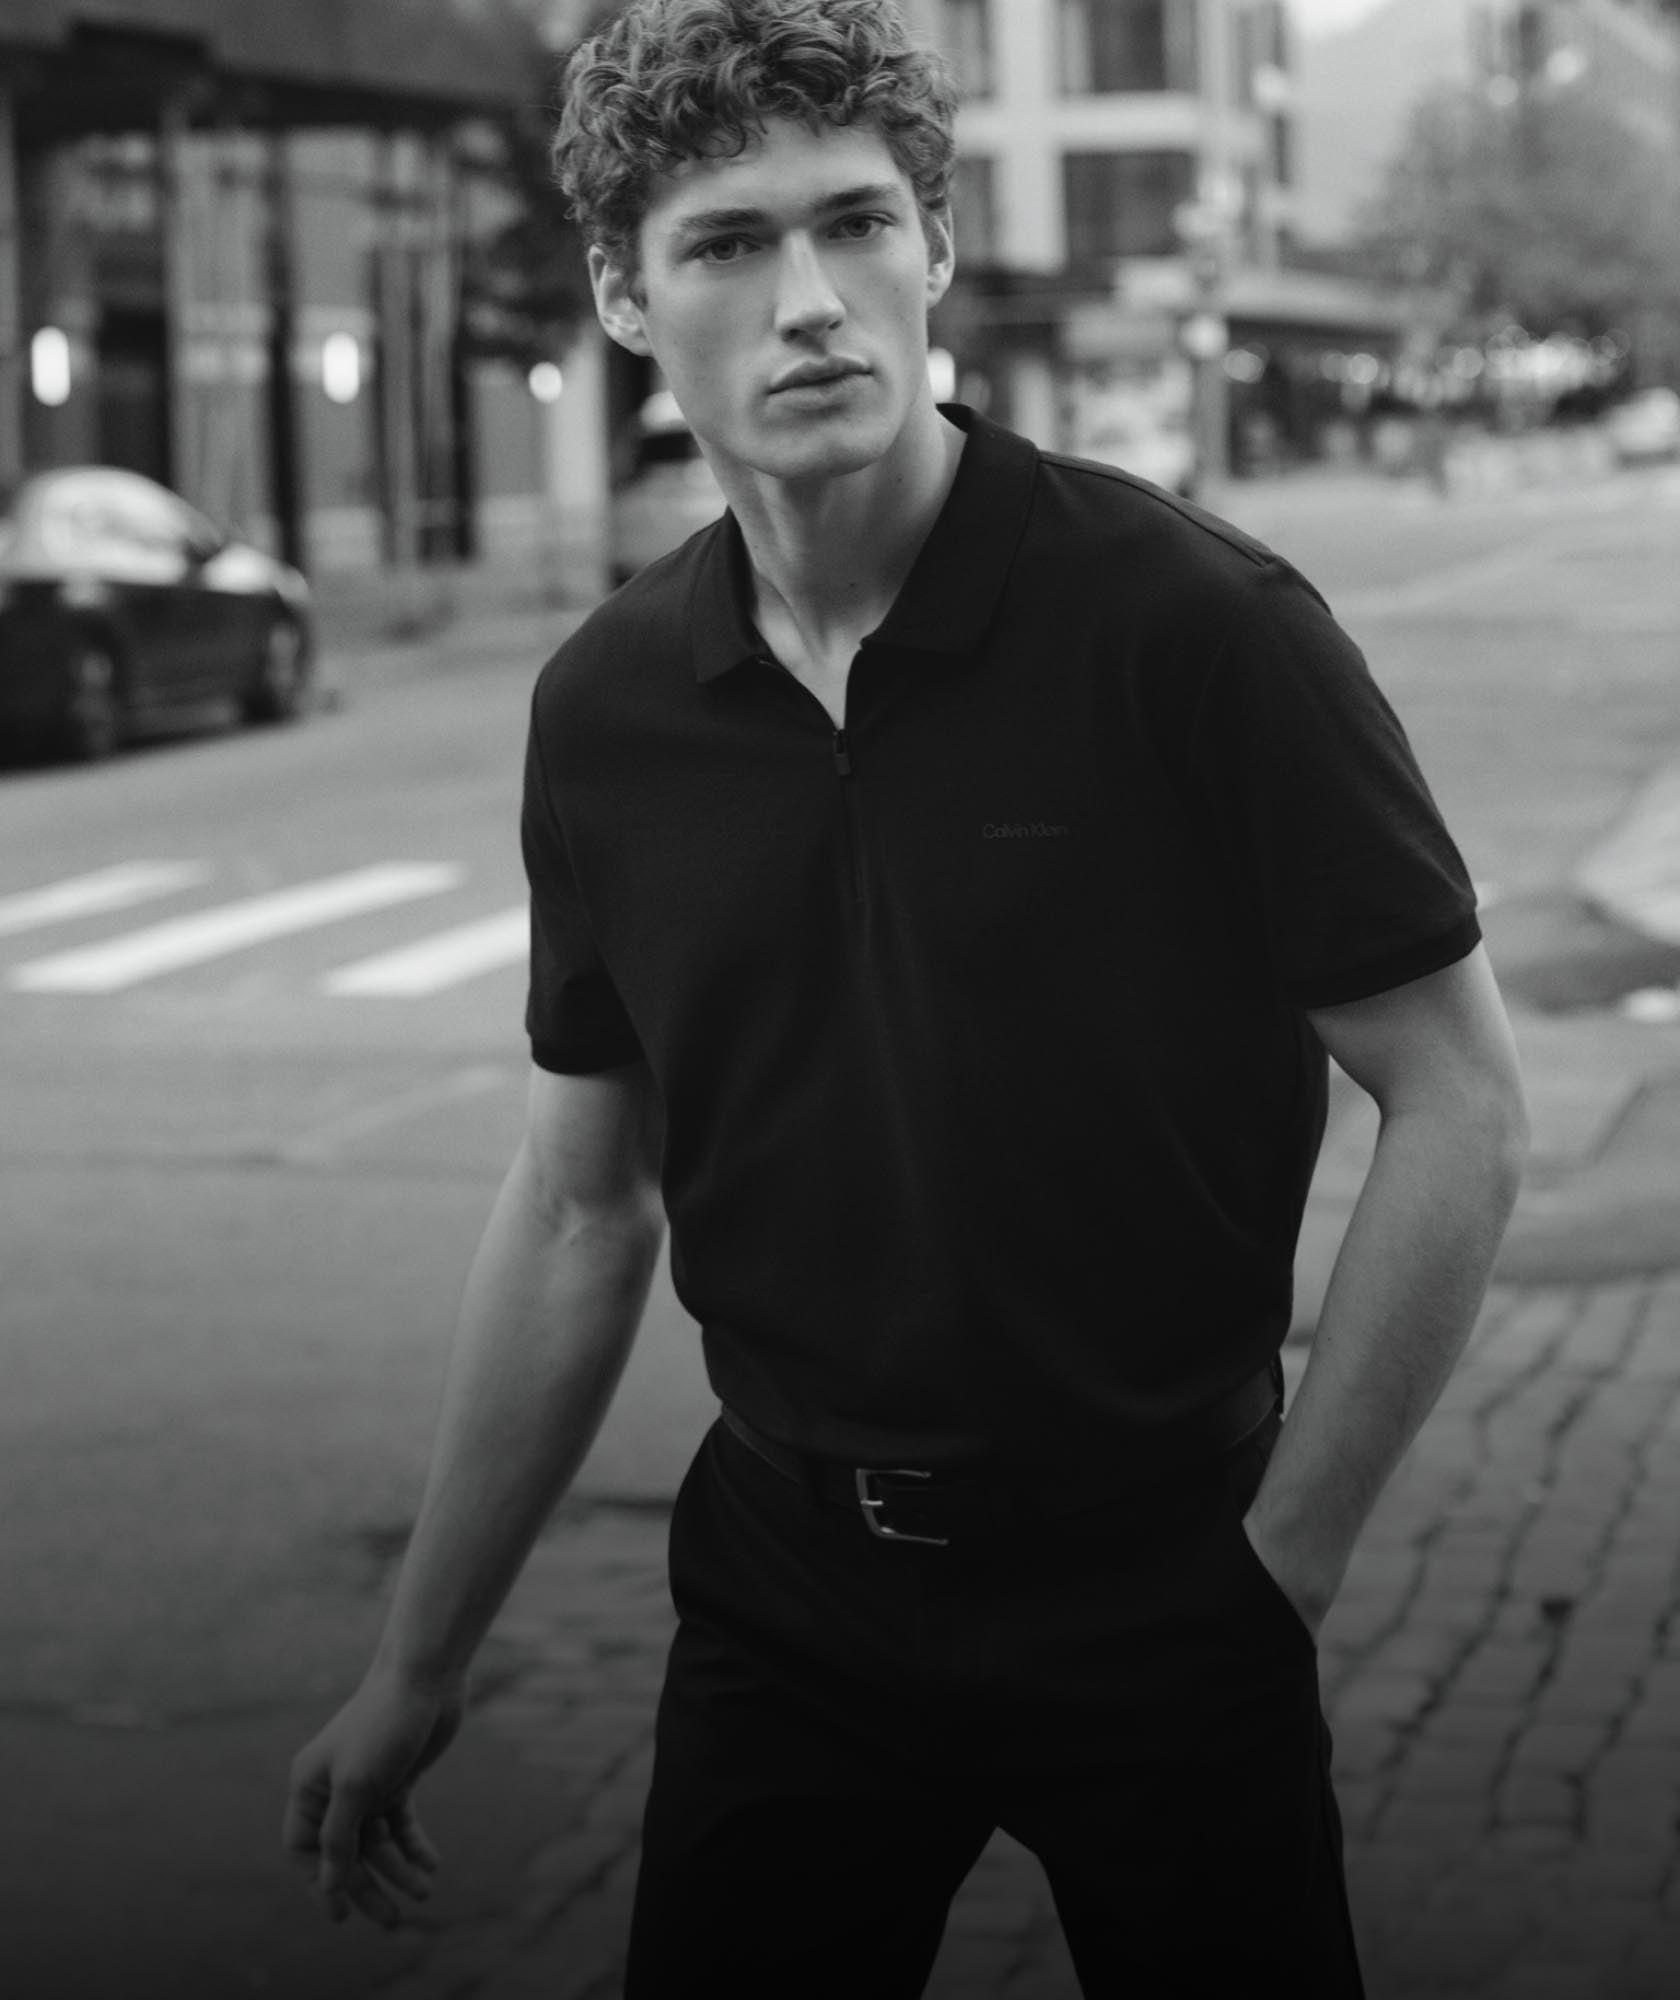 Man on a city street with his hand in his pocket wearing a black zip polo